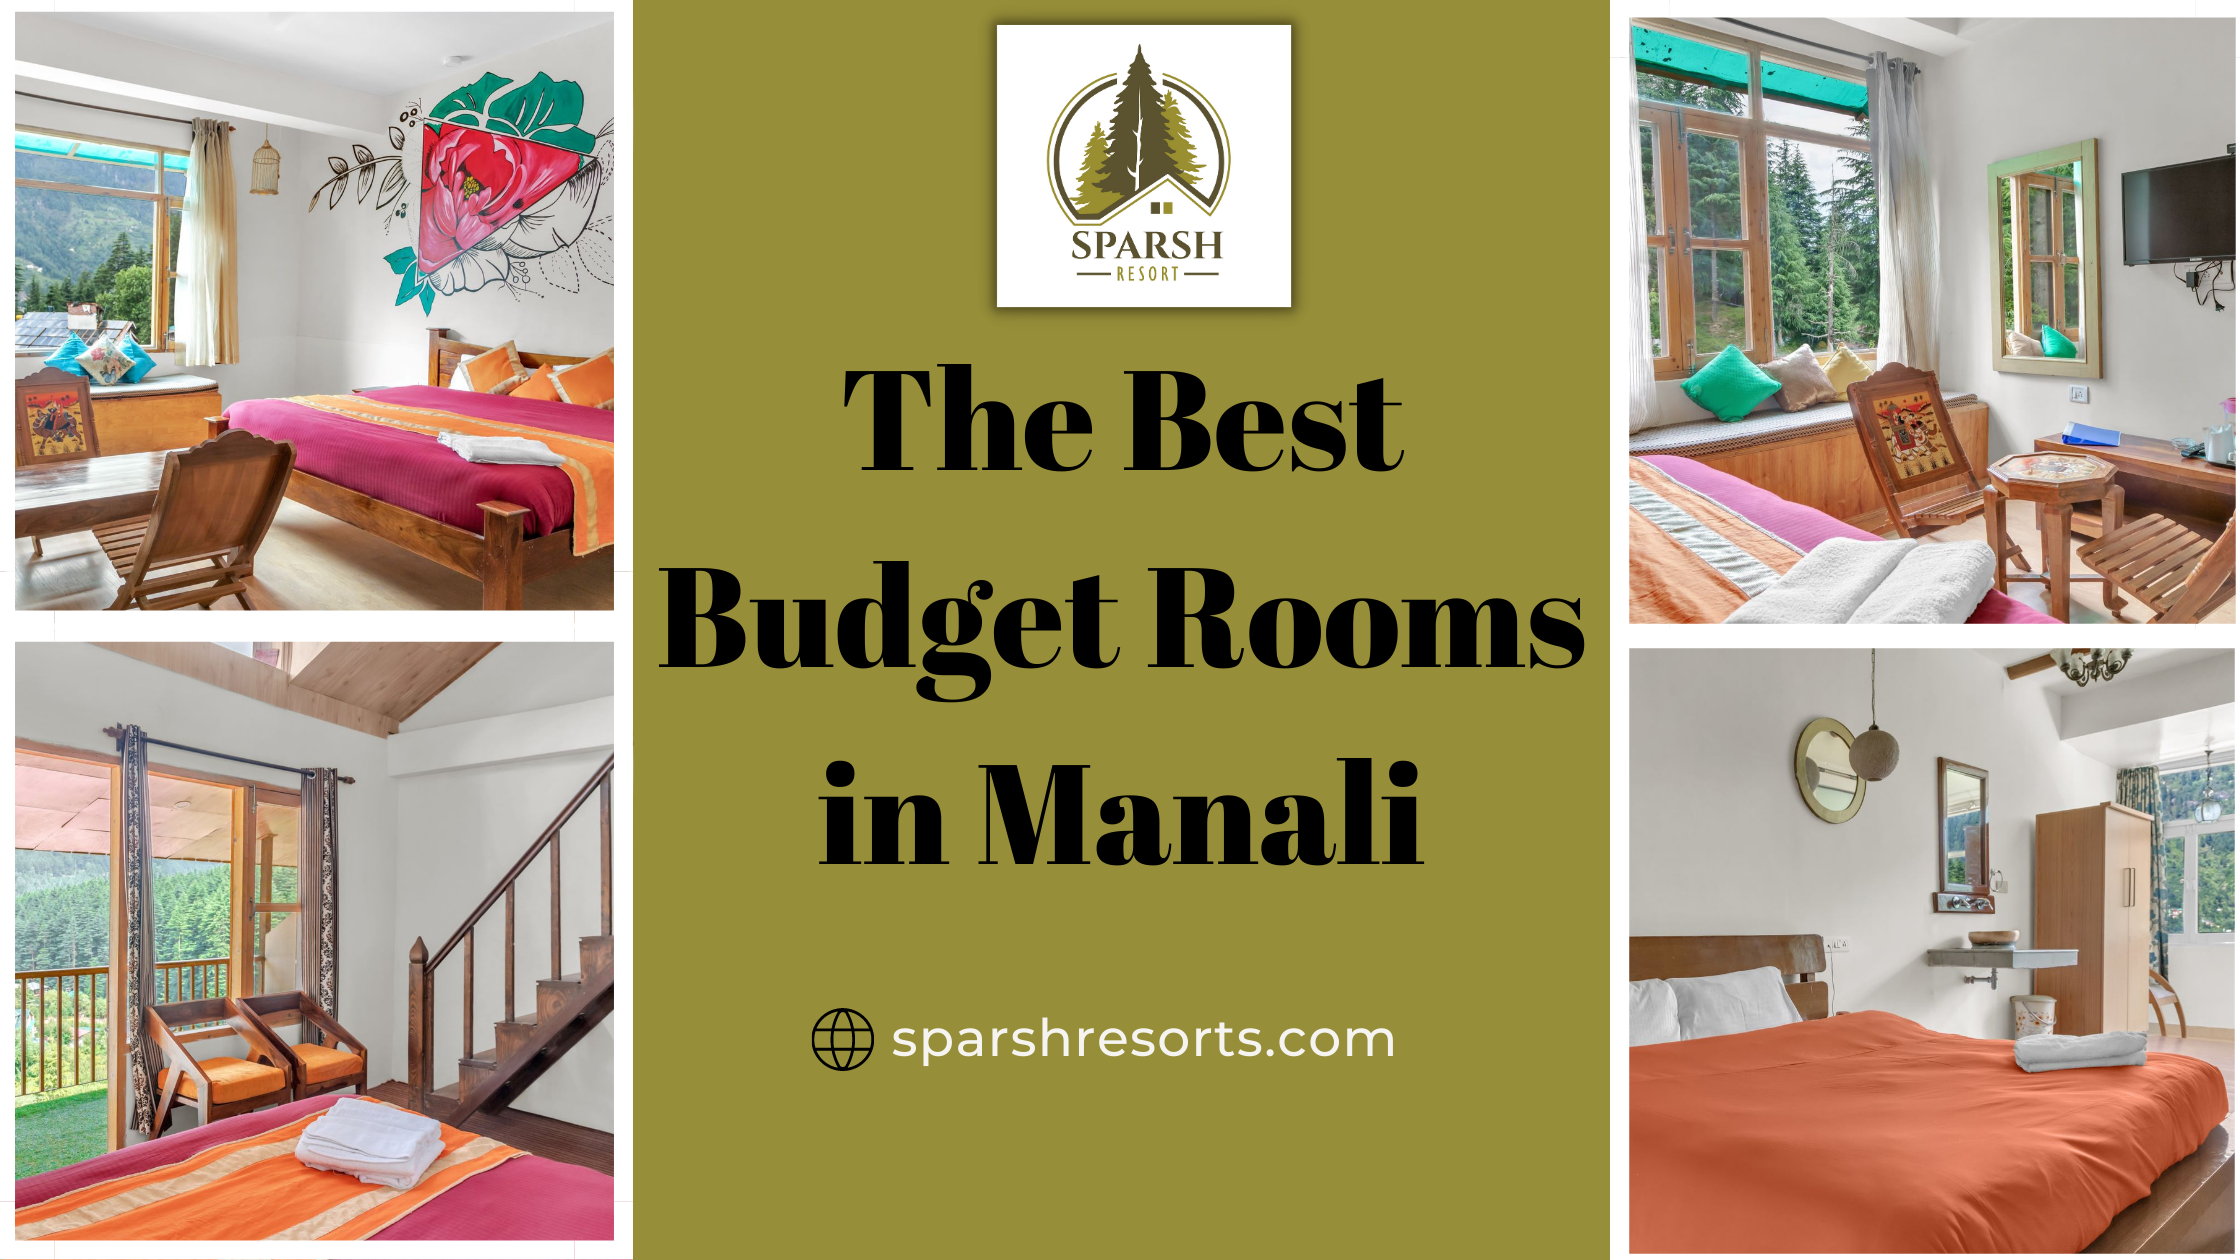 The Best Budget Rooms in Manali - Sparsh Resort